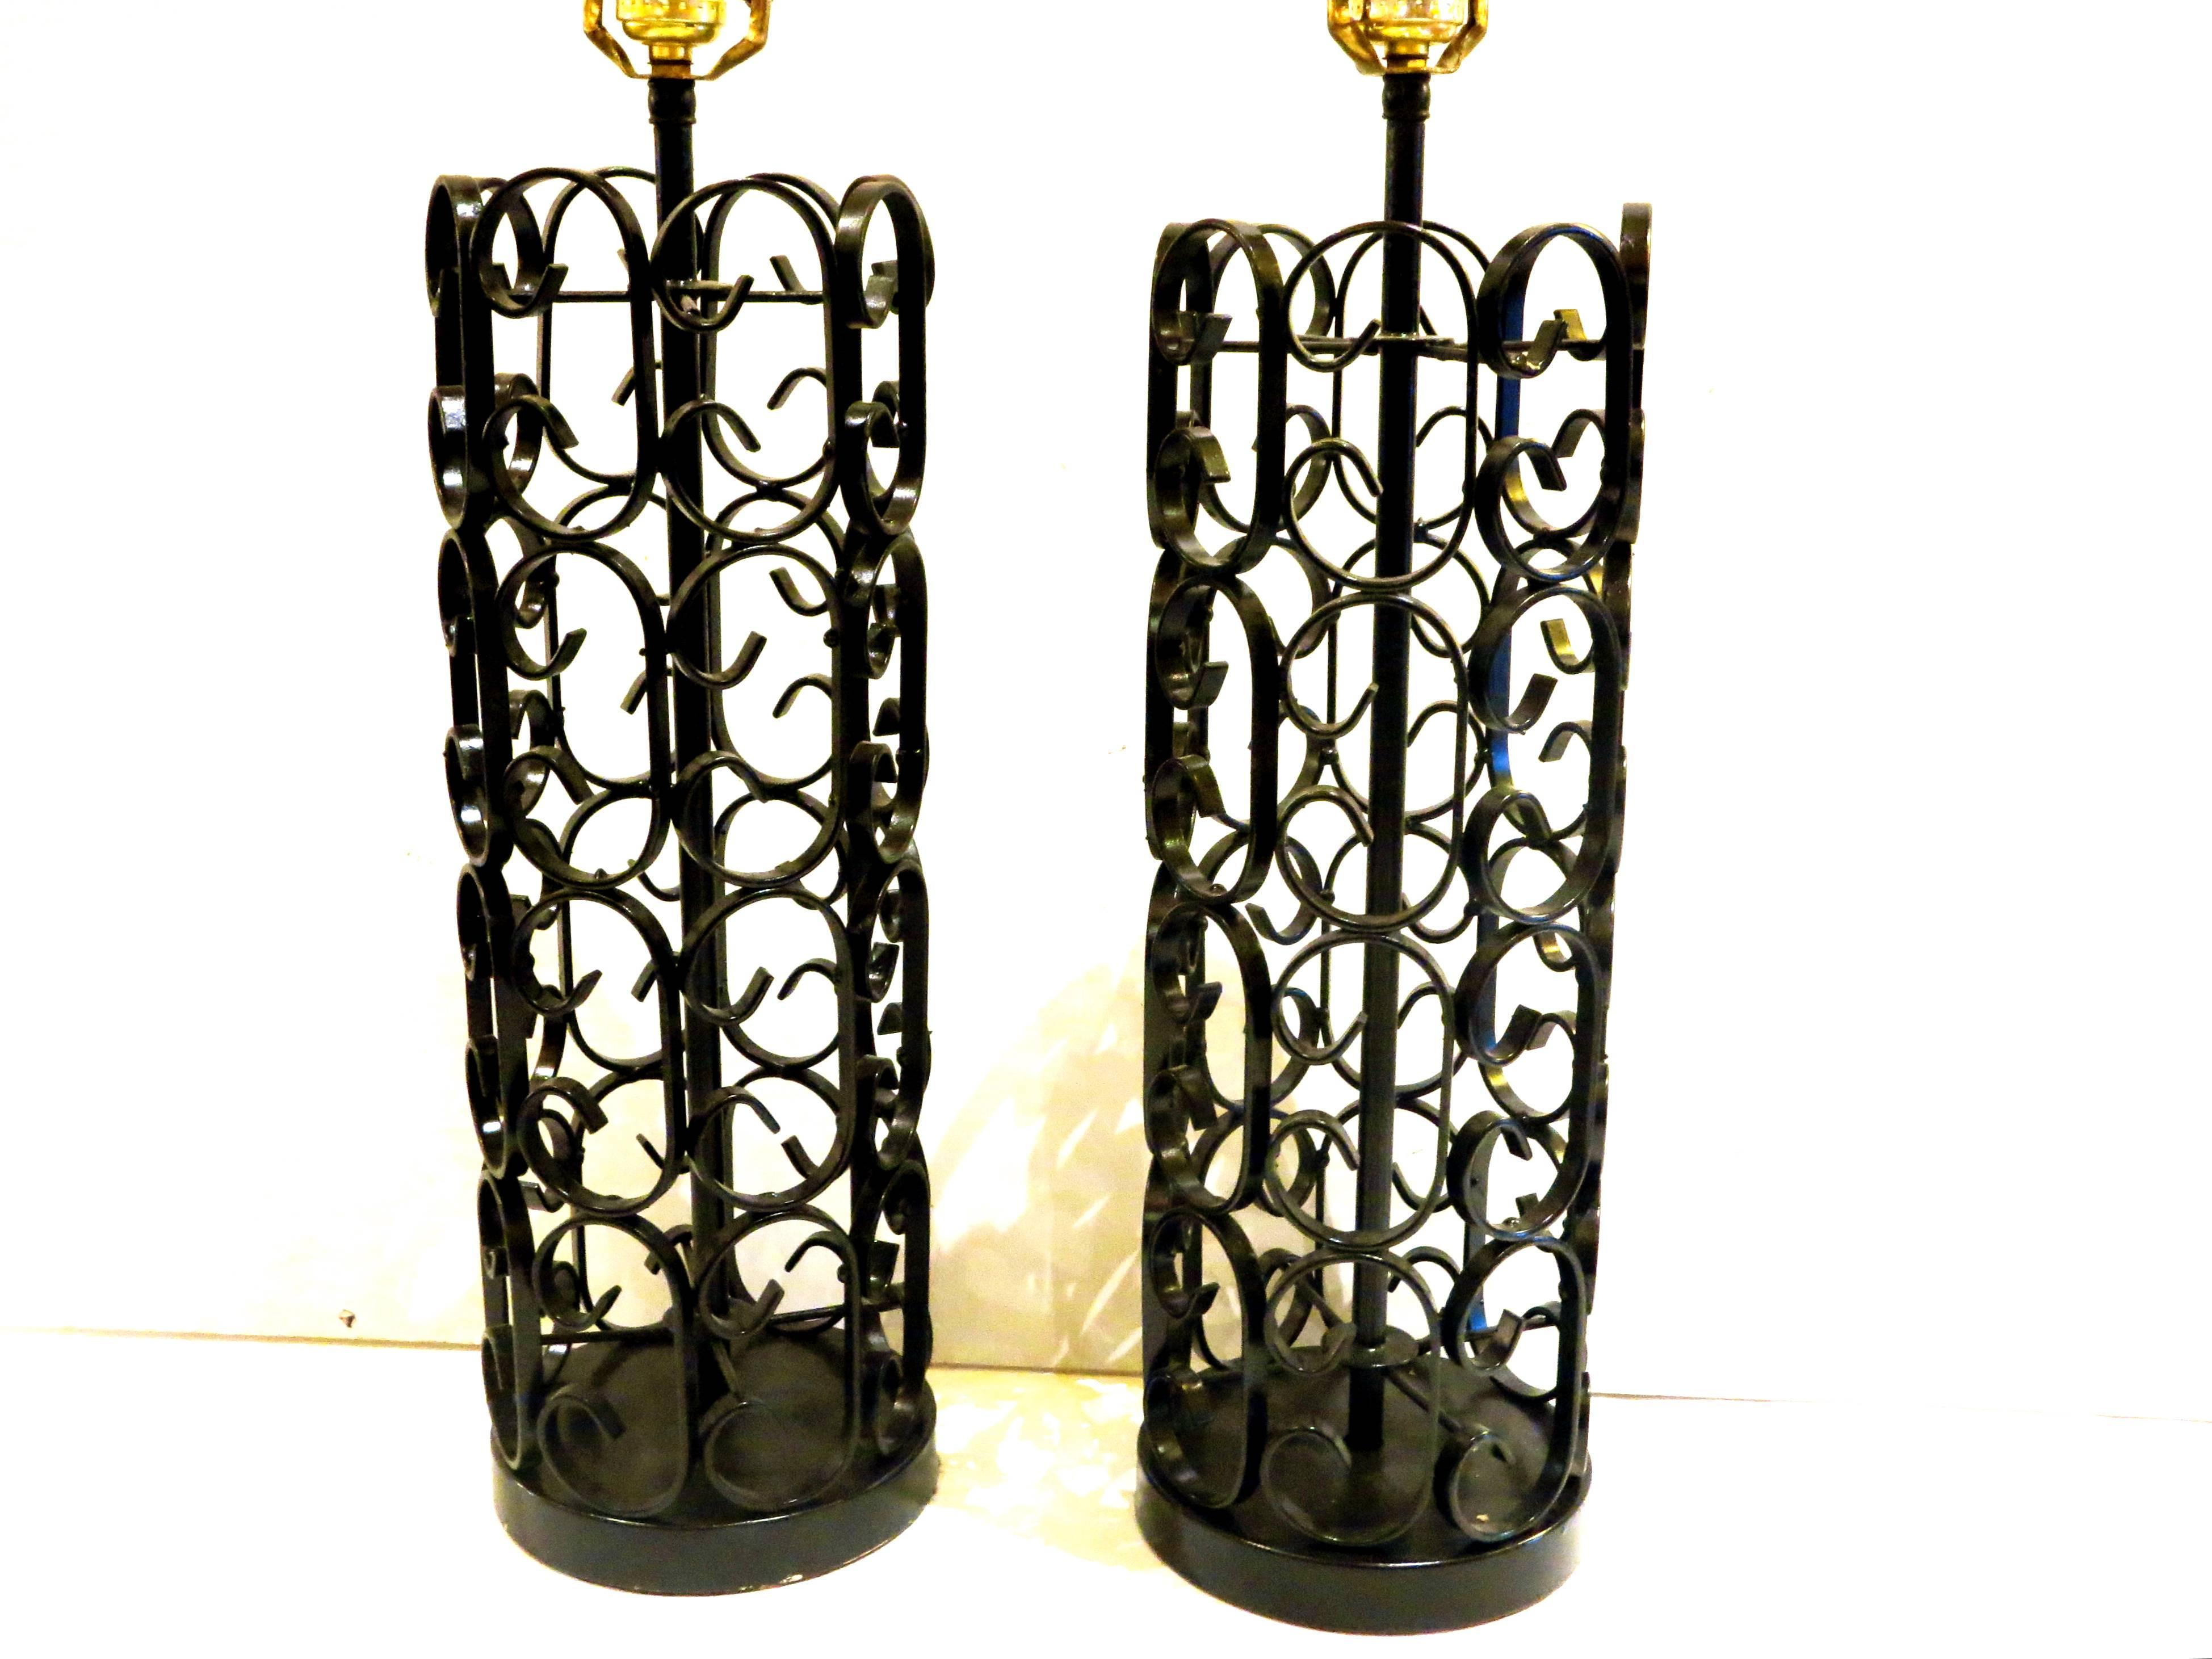 Nice set of two iron decorative table lamps, circa 1960s part of the Grenada collection designed by Arthur Umanoff for Boyuer Scott, the lamps have been reprayed in satin black, and rewired, NO Lampshades Included , these set its beautiful and